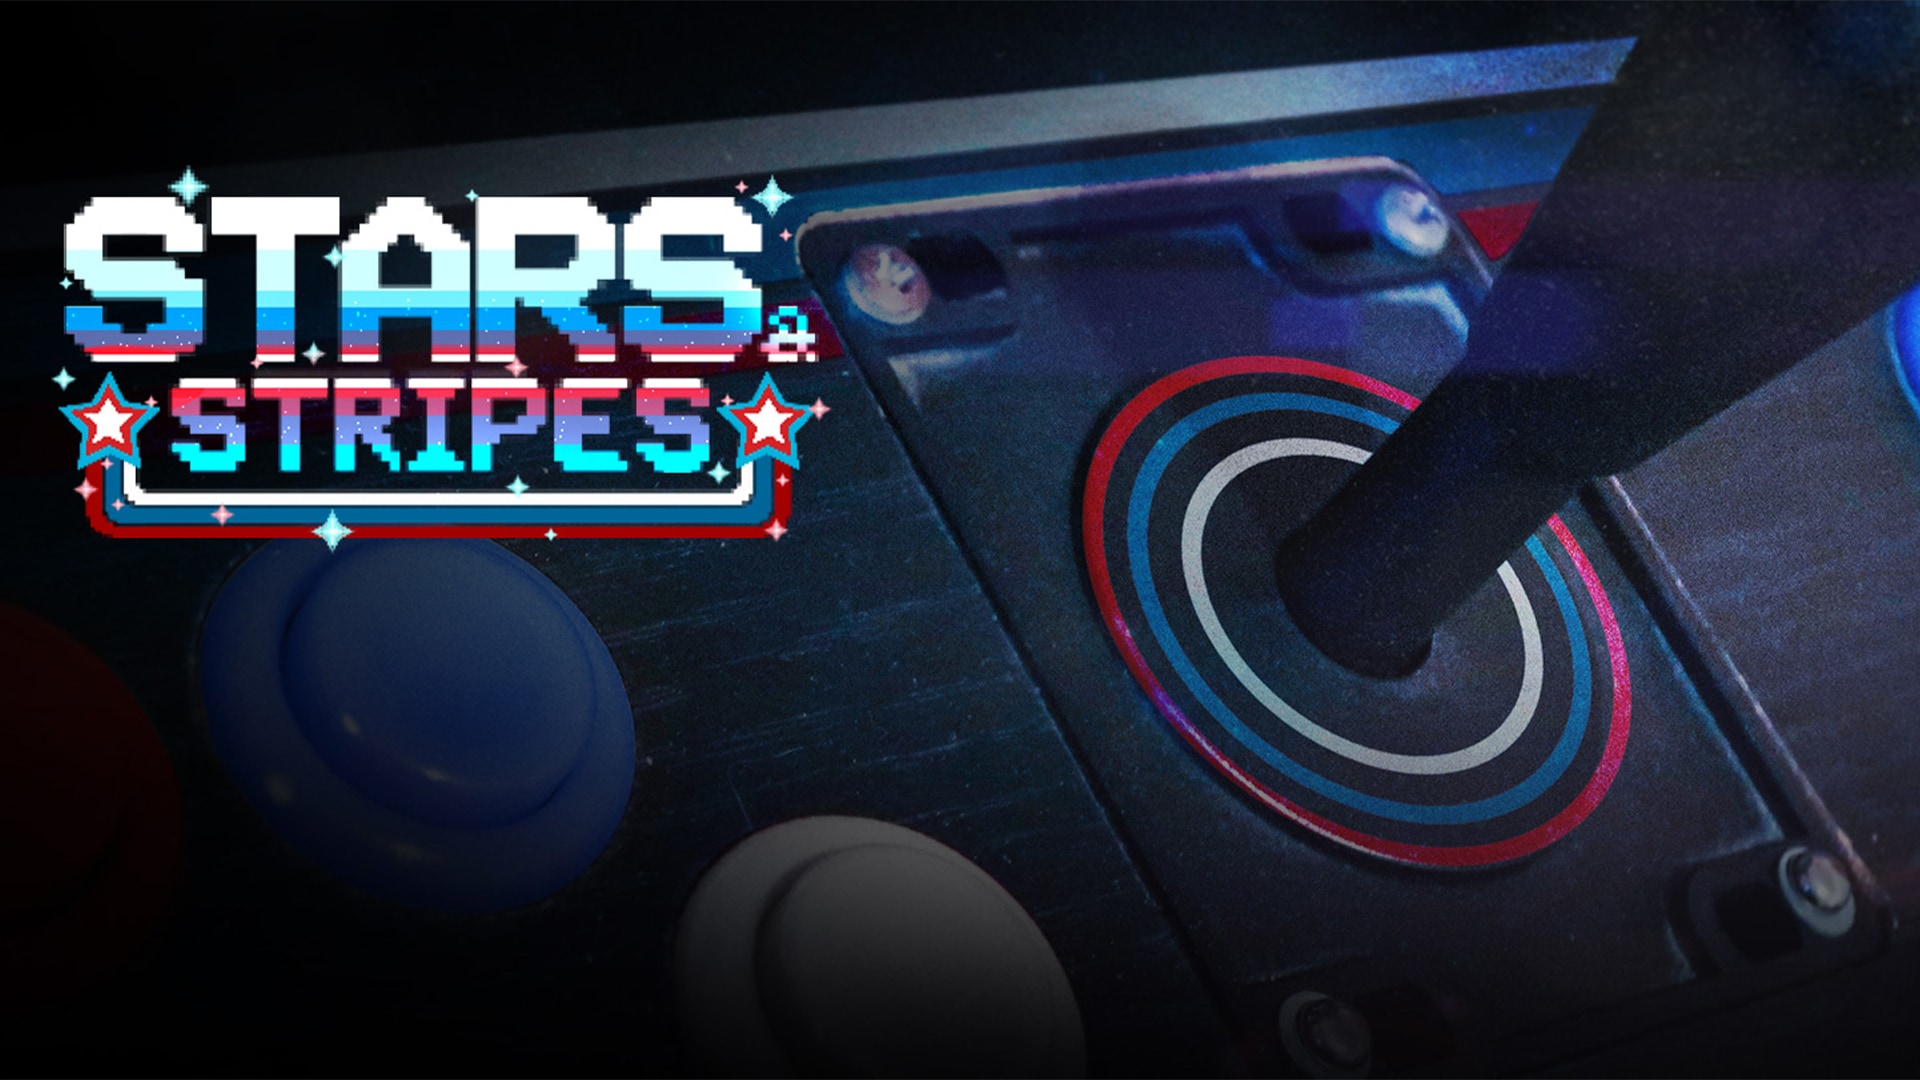 Earn your stripes with the Stars & Stripes bundle